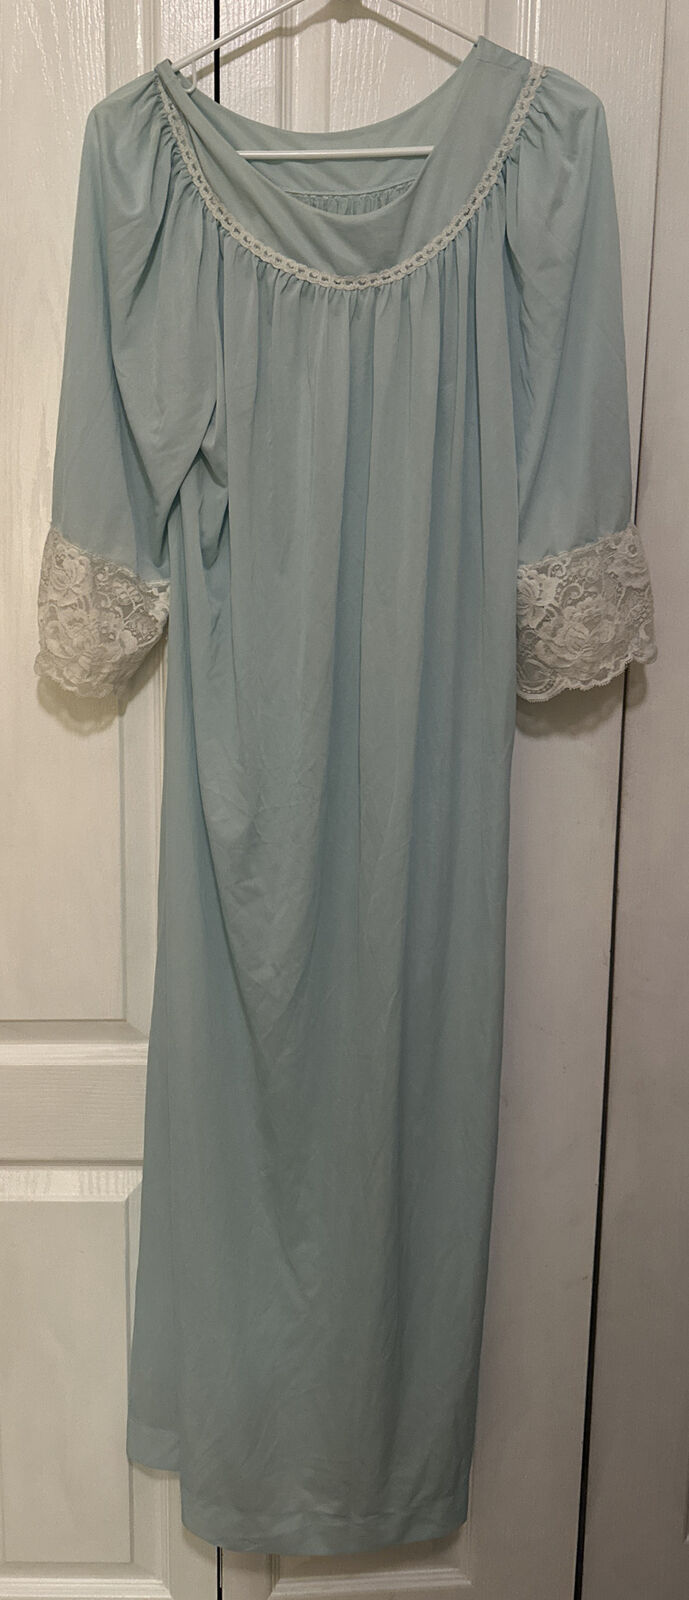 Vintage Colony Club SKY. BLUE LACE Trim Nightgown… - image 1